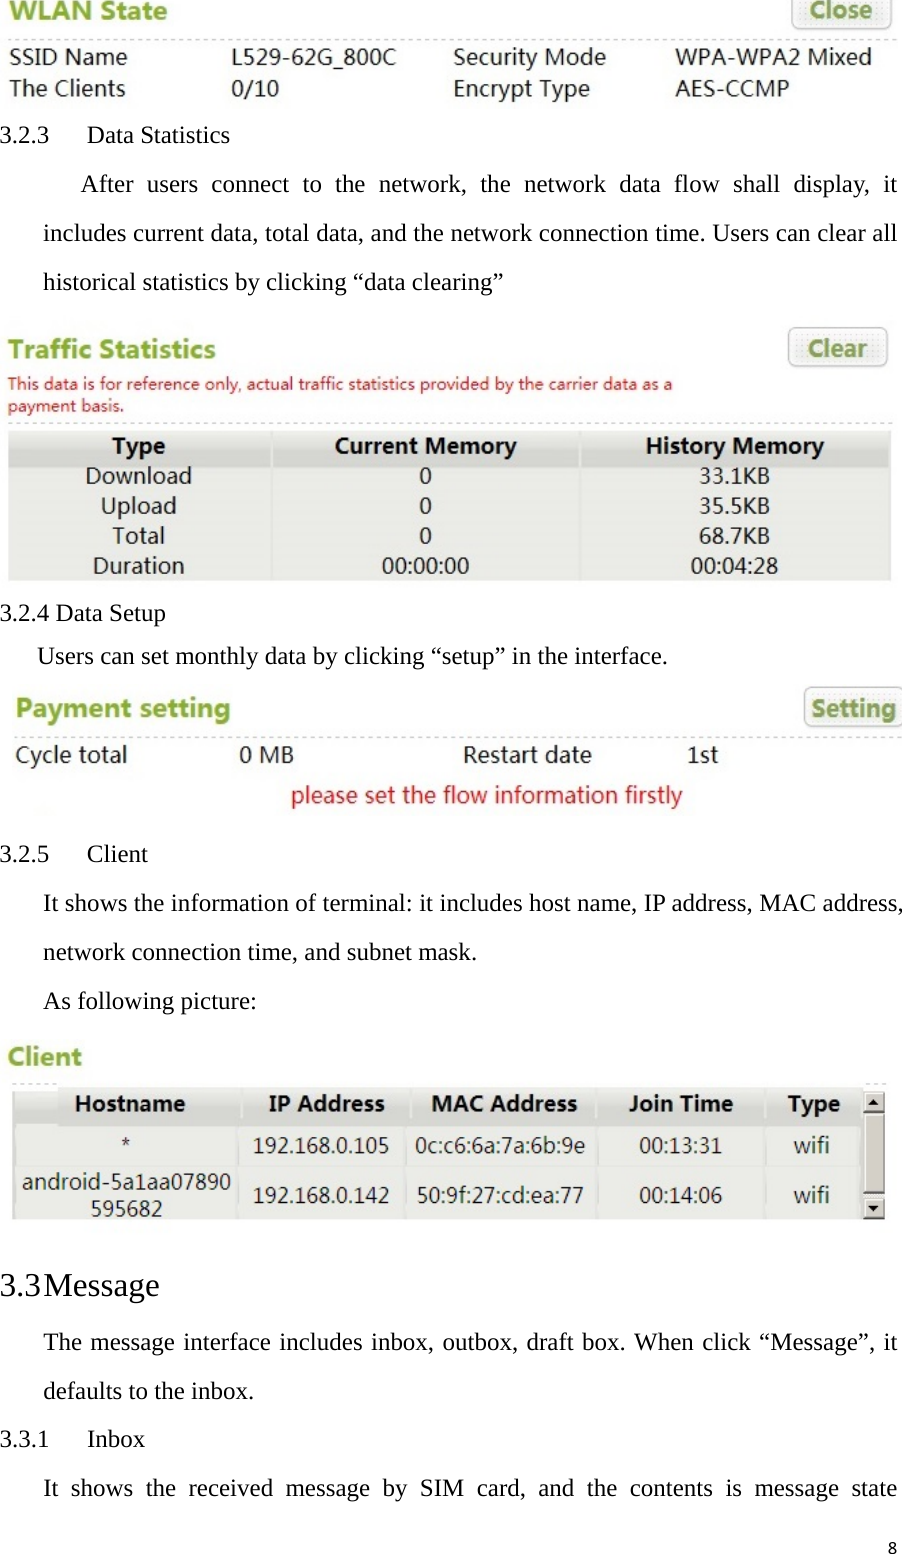 8 3.2.3 Data Statistics After users connect to the network, the network data flow shall display, it includes current data, total data, and the network connection time. Users can clear all historical statistics by clicking “data clearing”    3.2.4 Data Setup       Users can set monthly data by clicking “setup” in the interface.  3.2.5 Client It shows the information of terminal: it includes host name, IP address, MAC address, network connection time, and subnet mask. As following picture:  3.3 Message The message interface includes inbox, outbox, draft box. When click “Message”, it defaults to the inbox.   3.3.1 Inbox It shows the received message by SIM card, and the contents is message state 